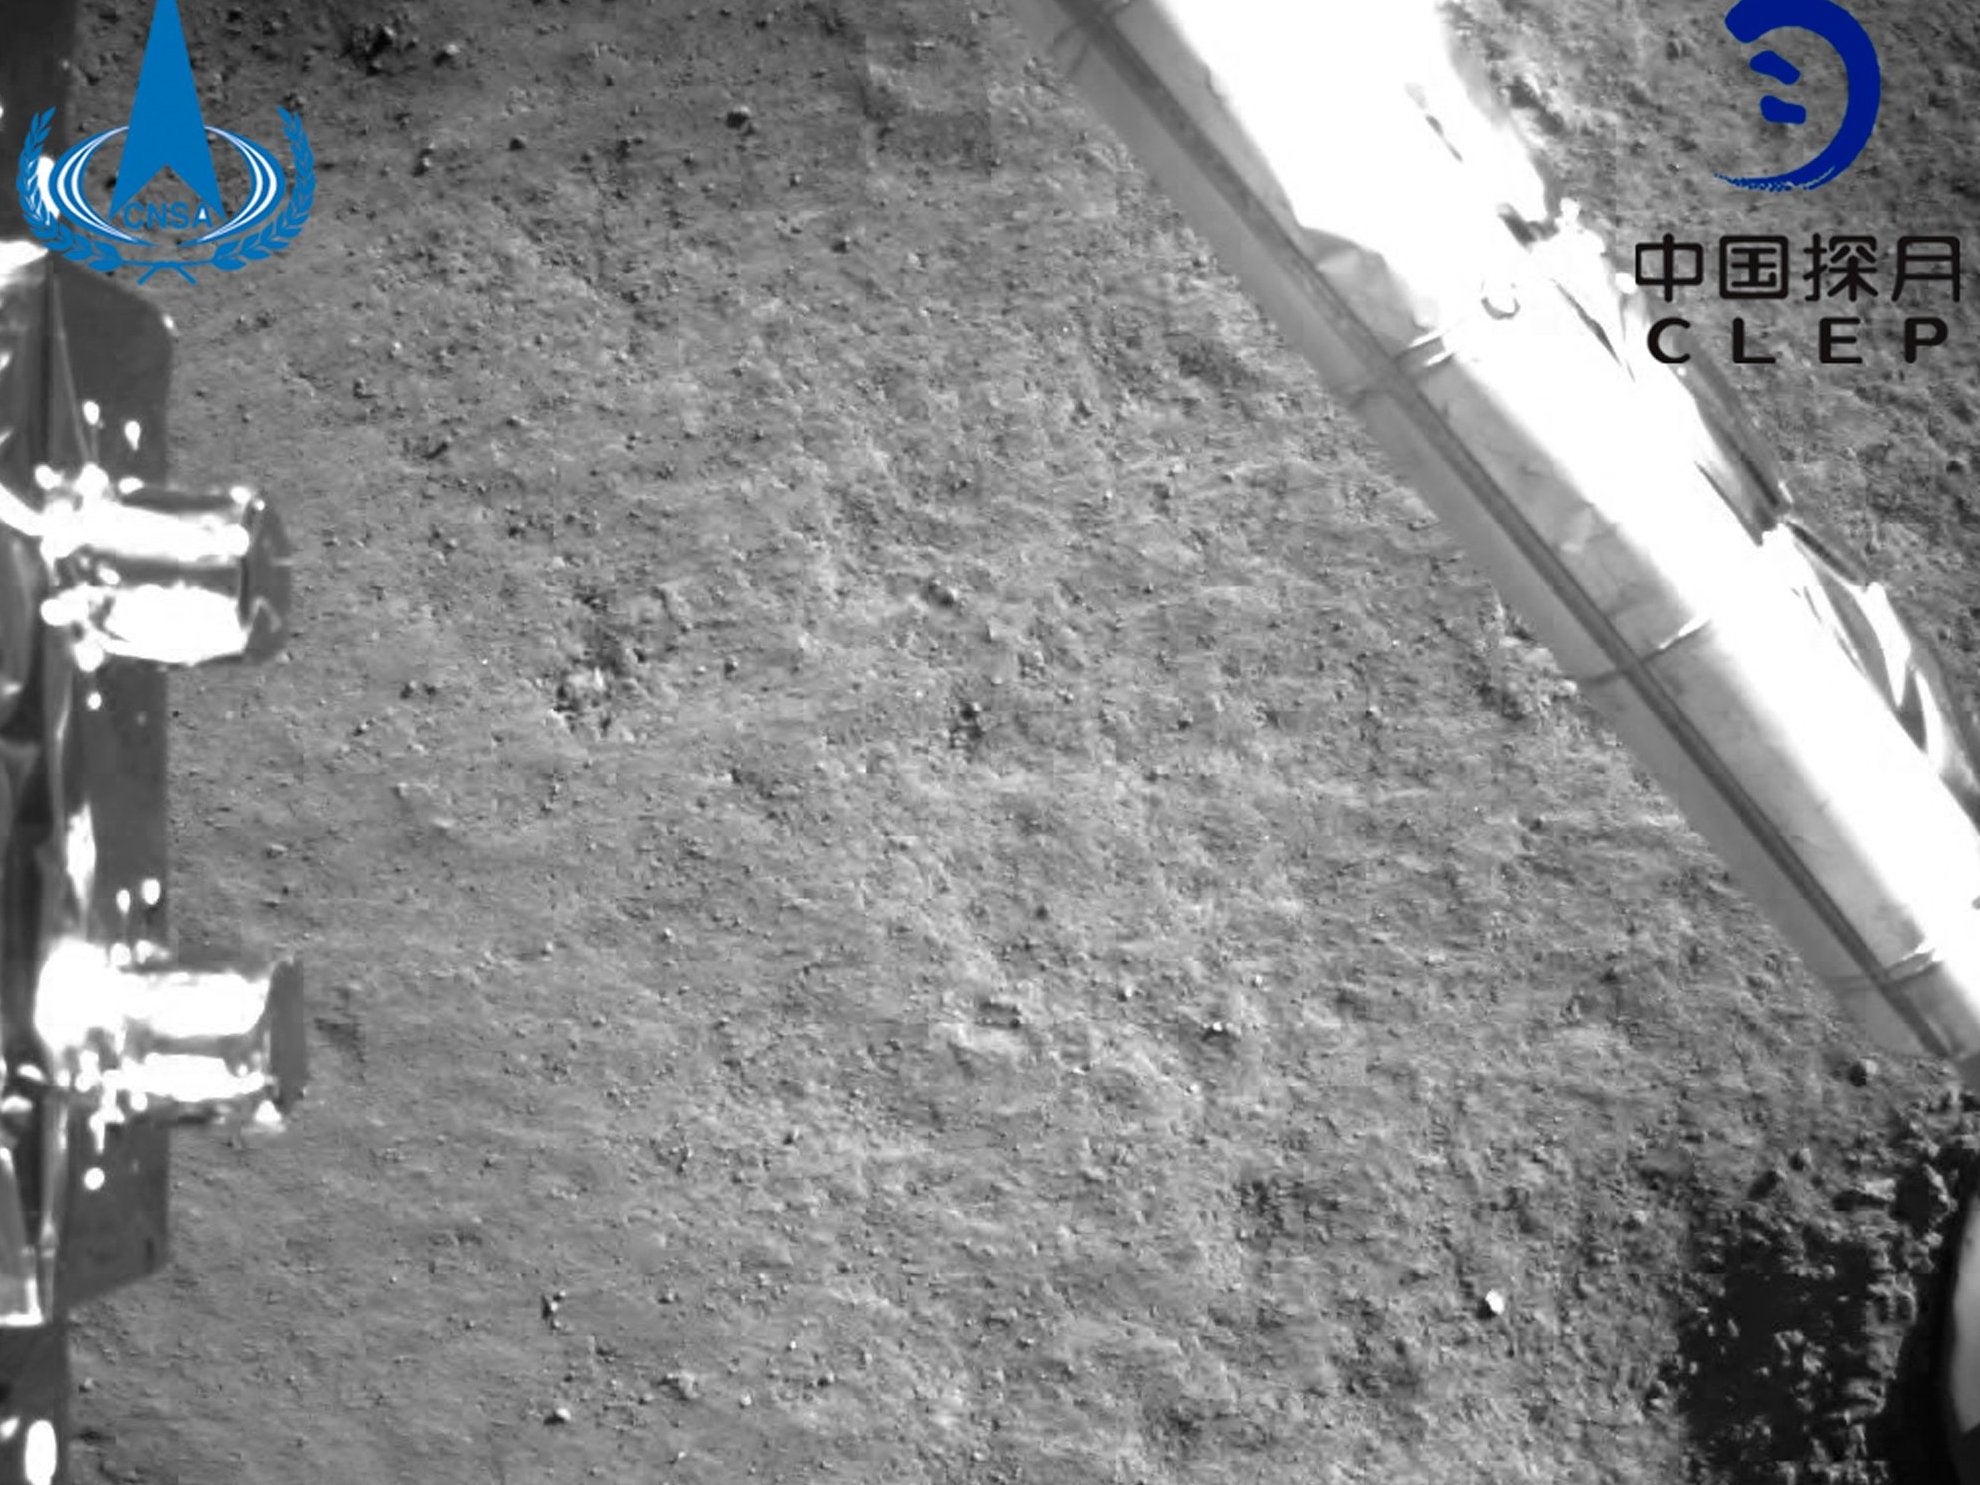 Another image taken by China’s Chang’e-4 probe after its landing